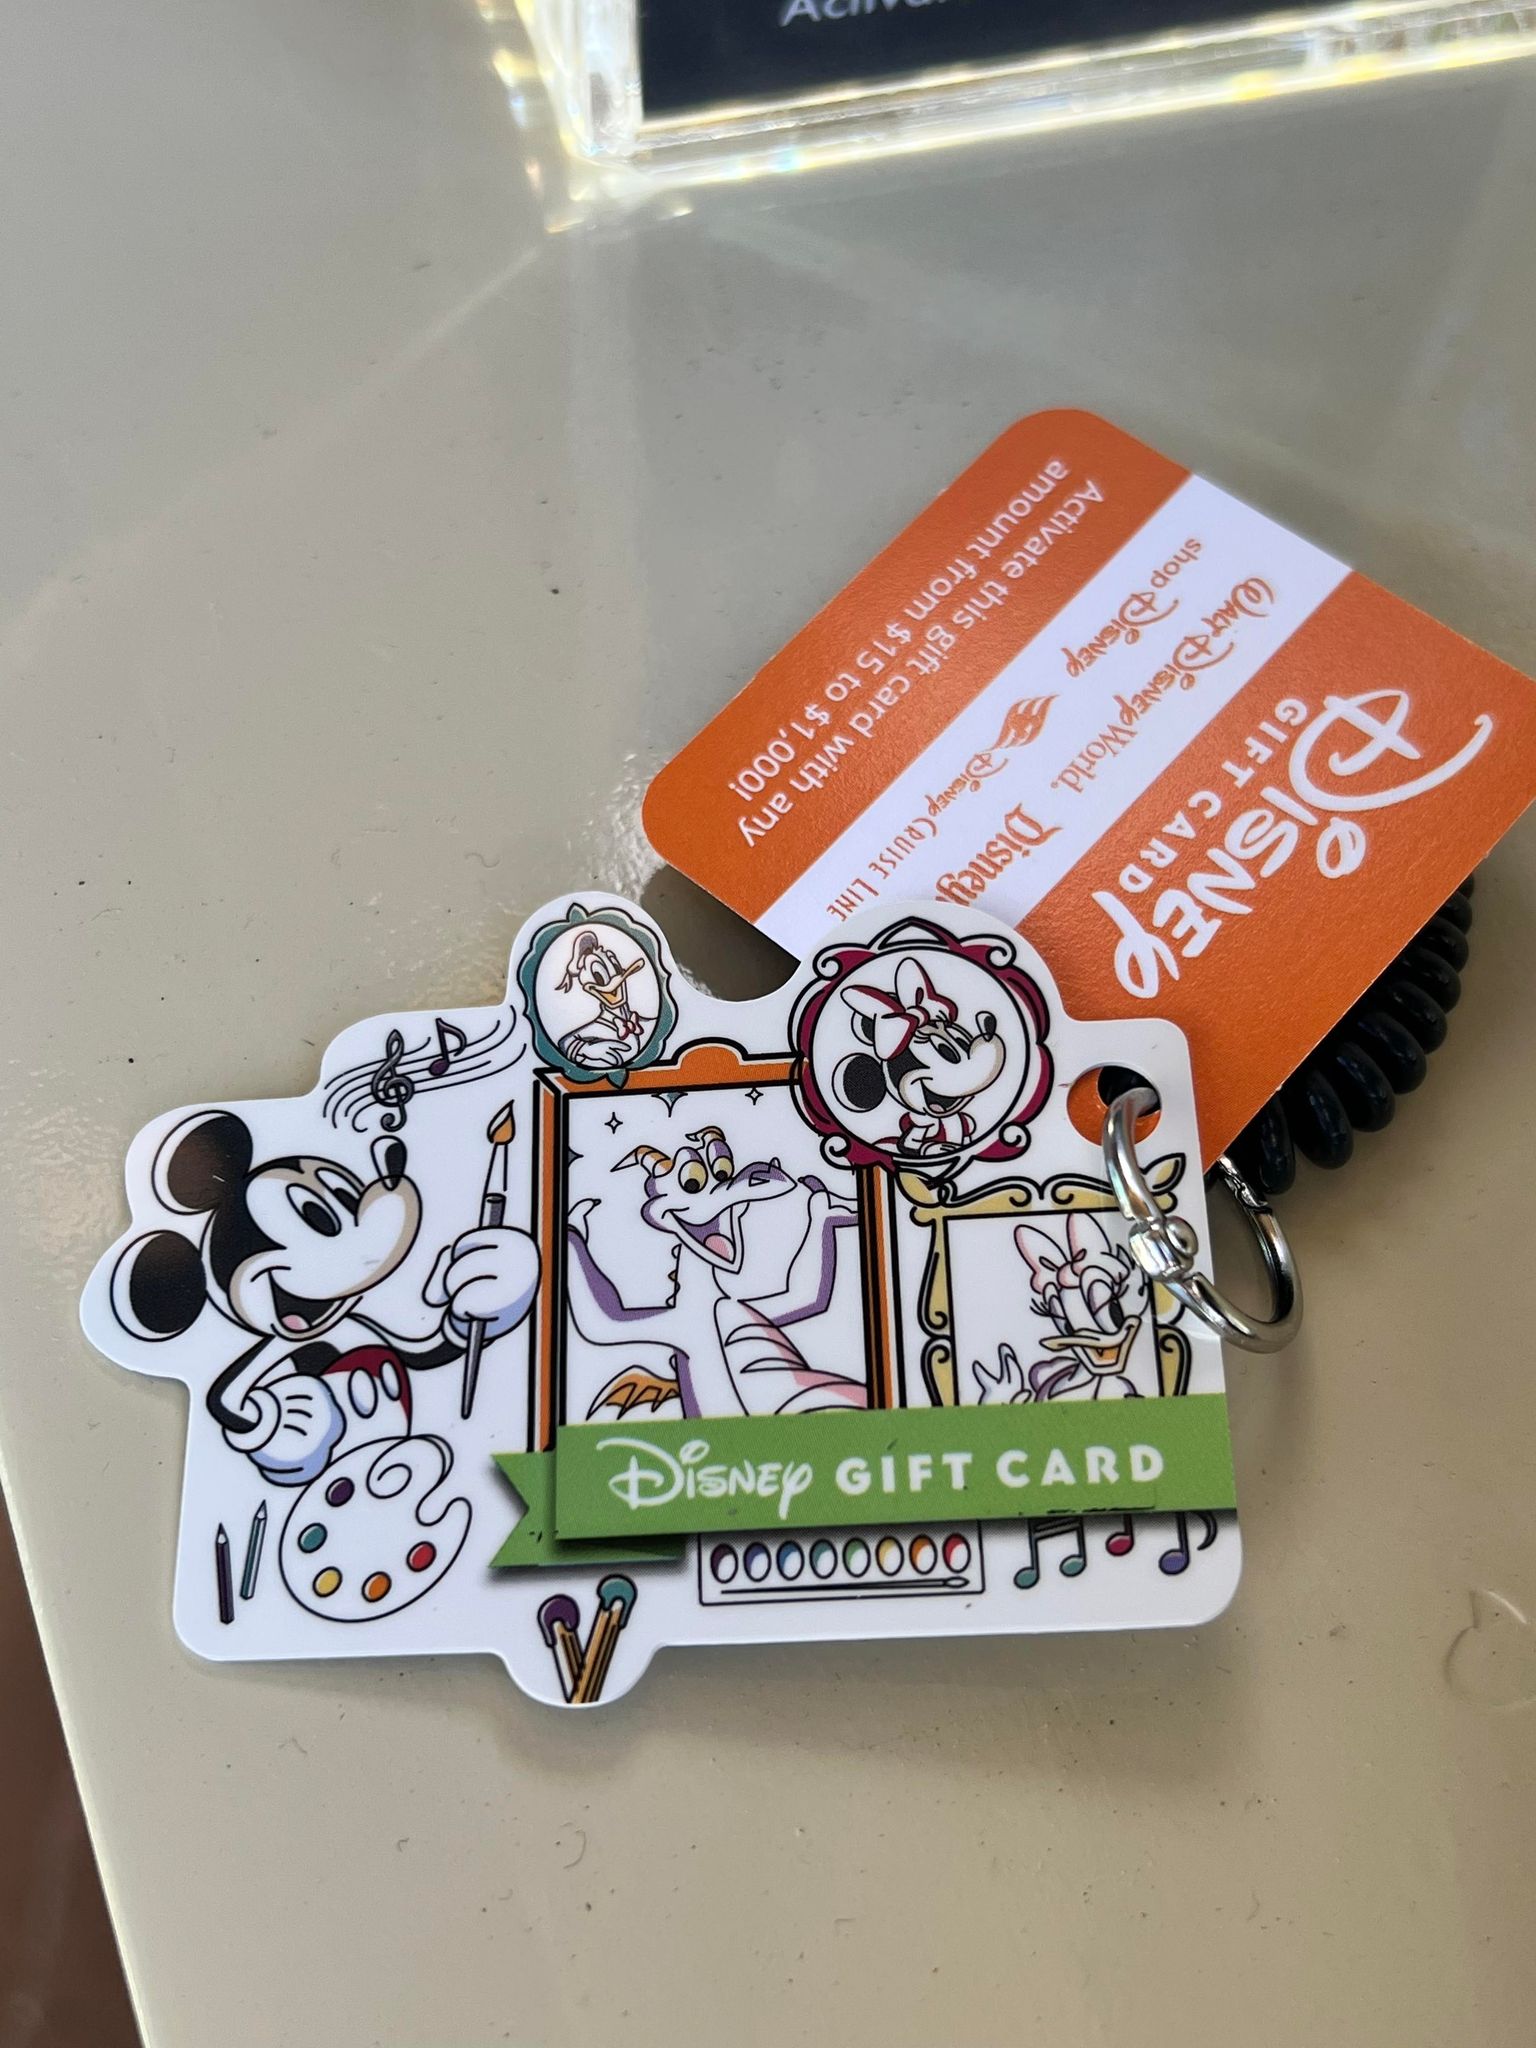 2018 EPCOT Festival Of The Arts Gift Card $0 Value Disney World 